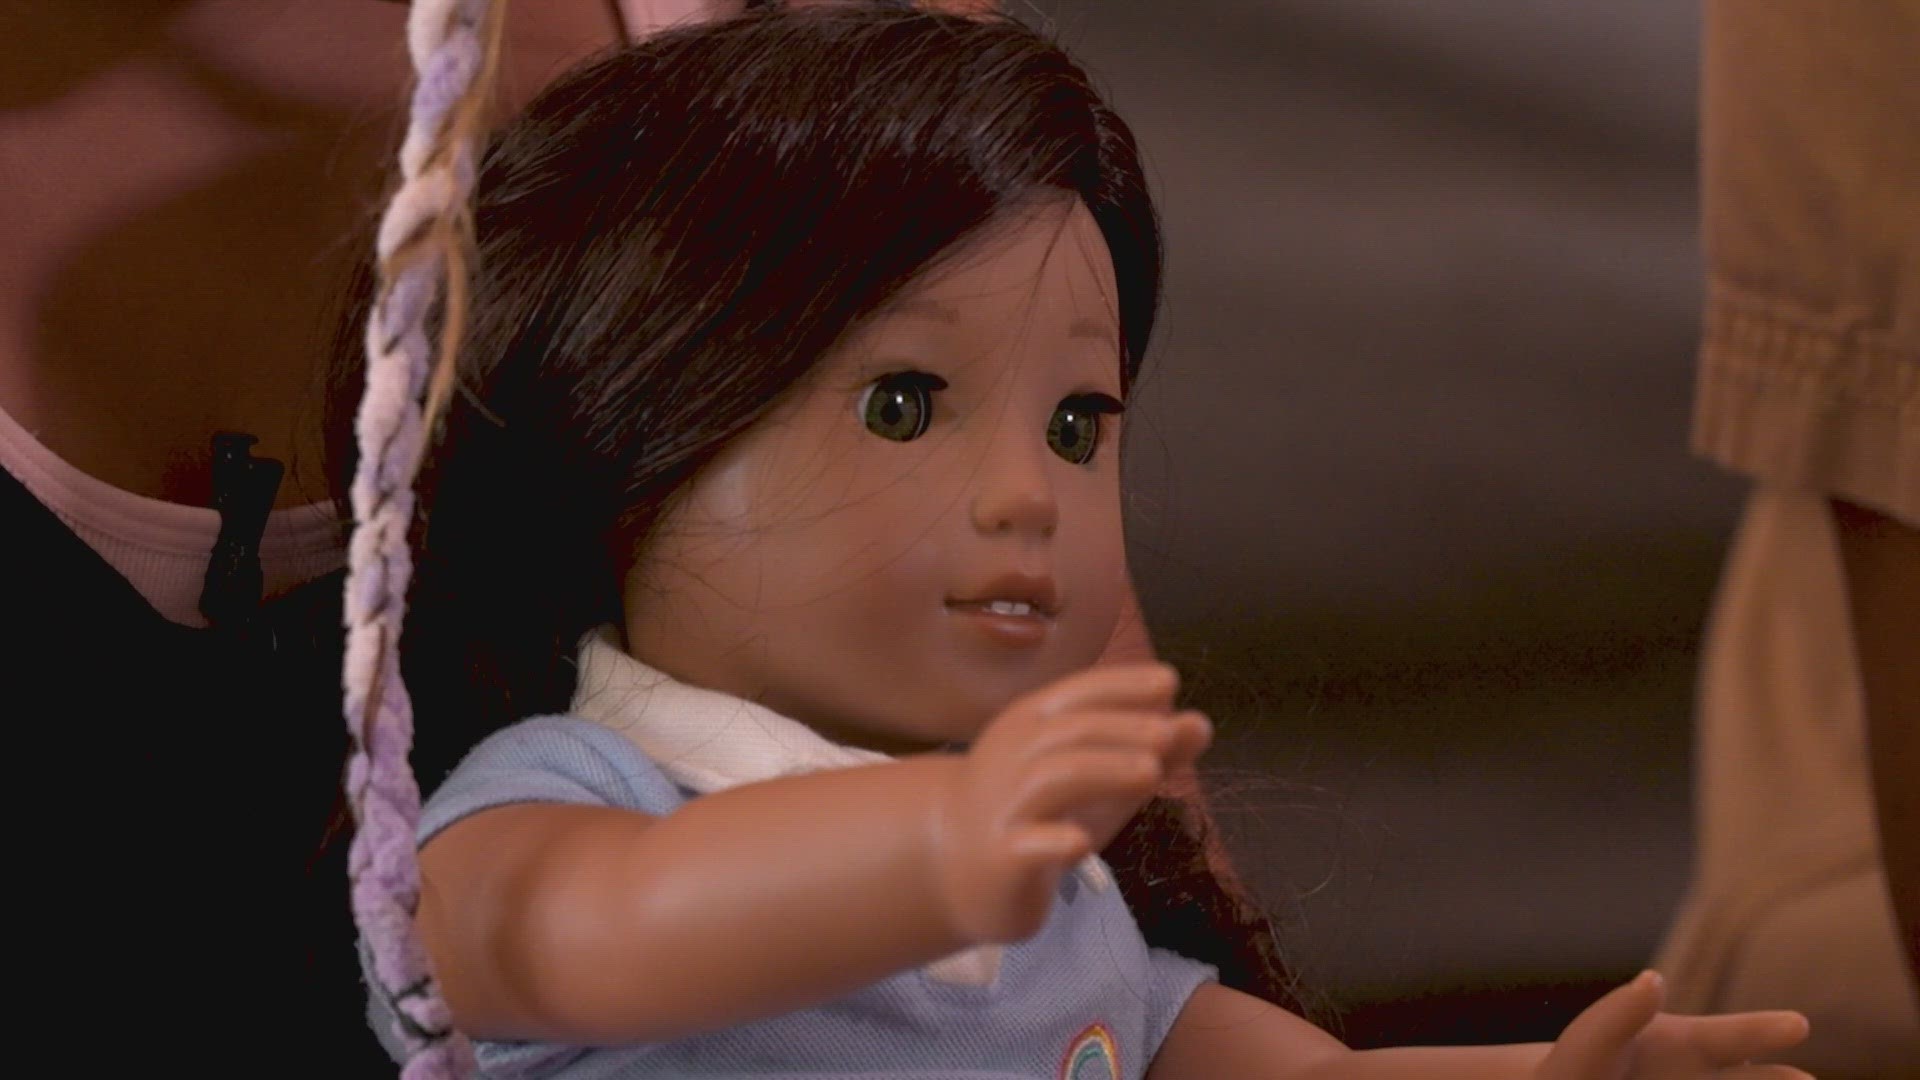 Many people have lost things on a plane. Thanks to a network of people, a DFW-area pilot retrieved an American Girl doll for Valentina Dominguez of Plano.